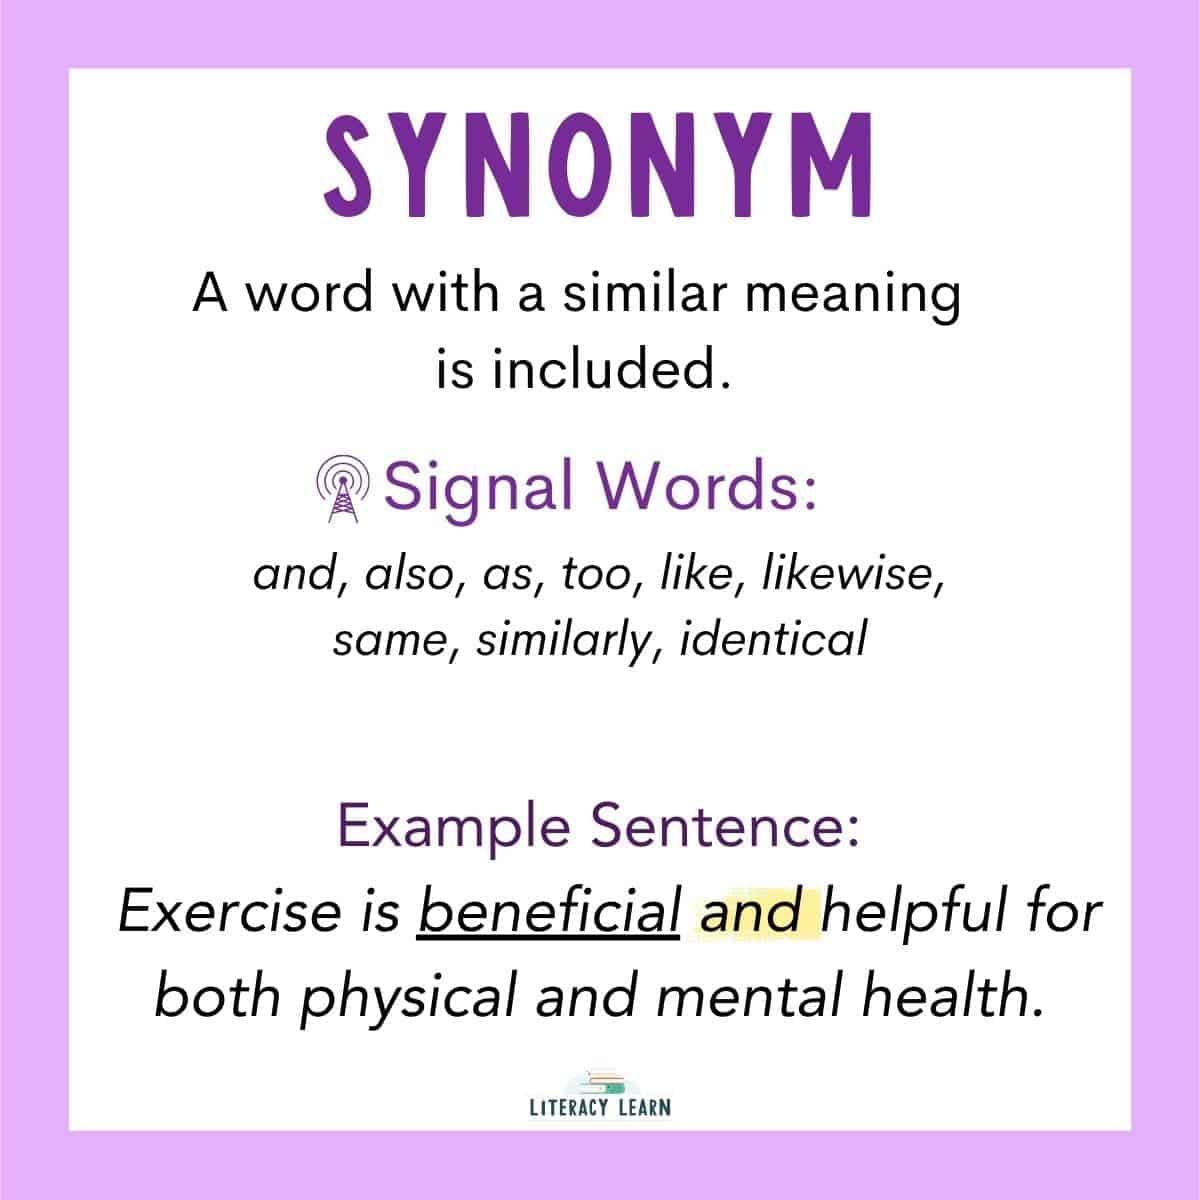 Purple visual of a synonym context clue with the meaning, signal words, and example.